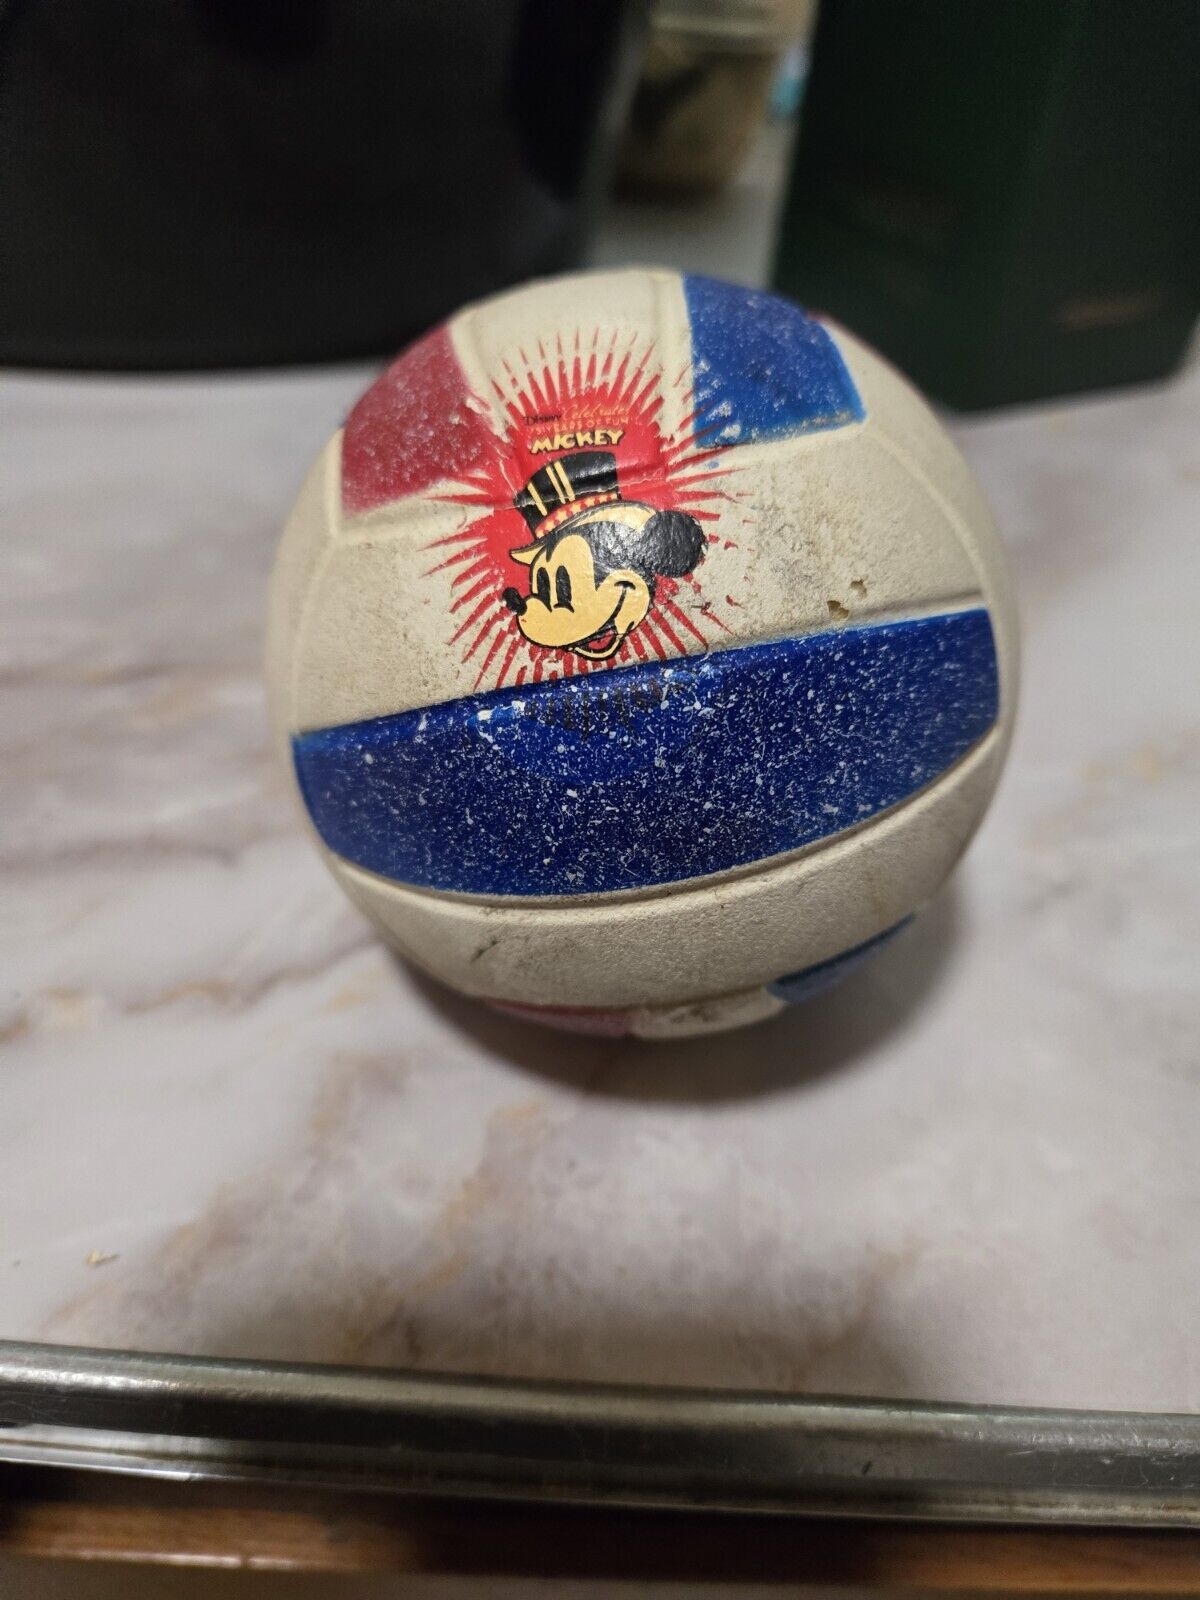 Vintage Mickey Mouse Volleyball Sponge Ball 3.5 Inches In Diameter 